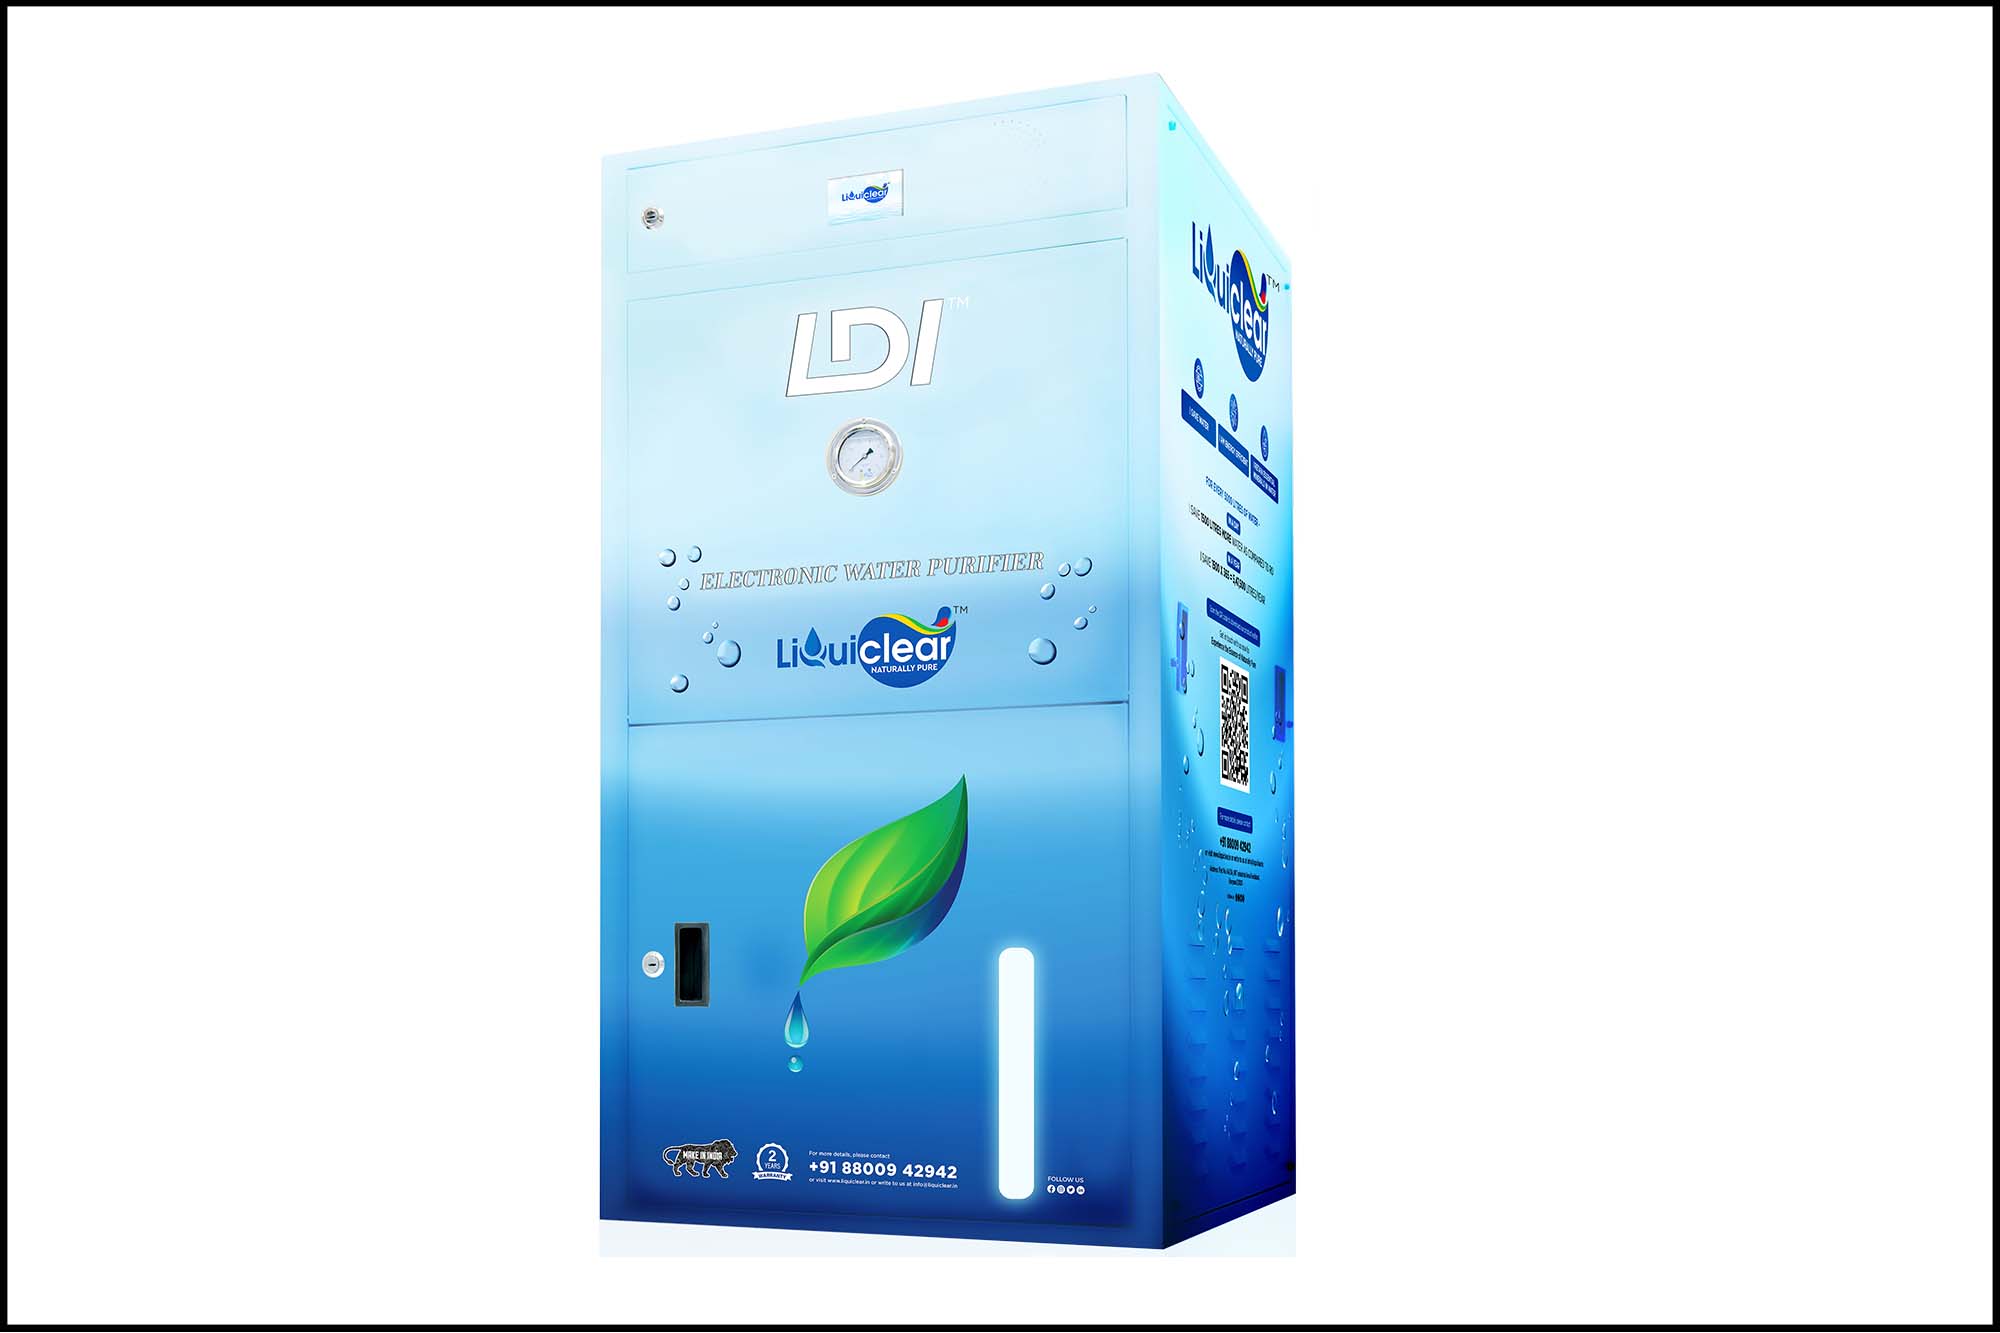 LDI Technology: The catalyst for sustainable water solutions